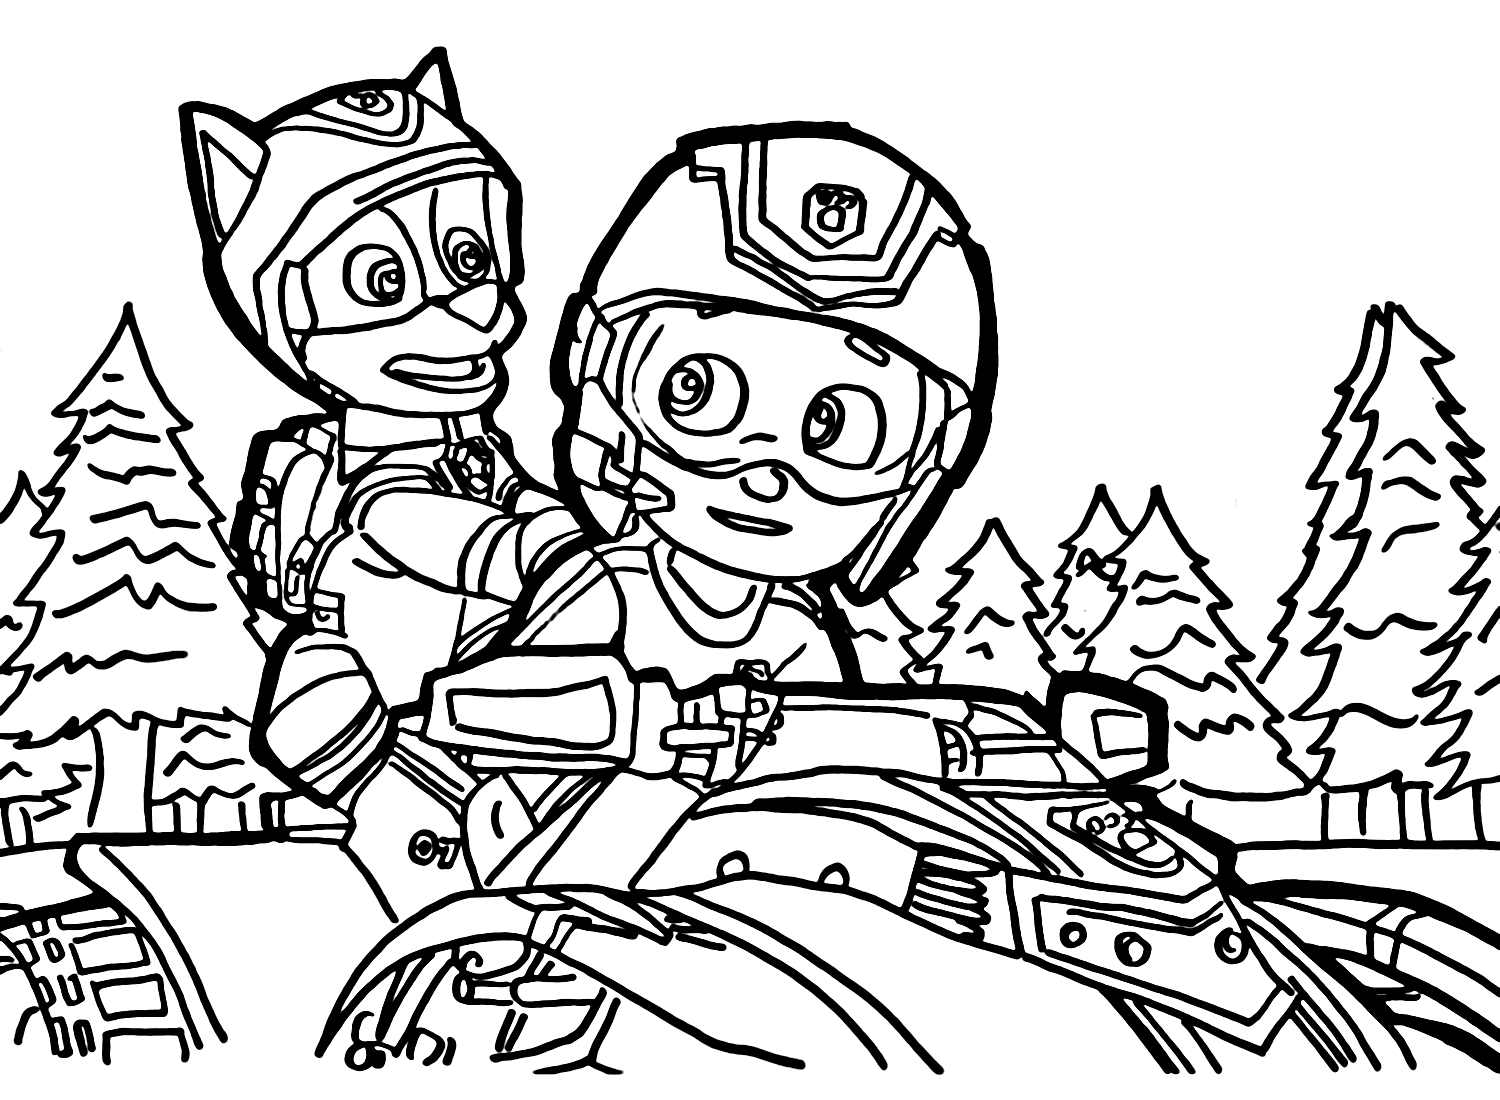 Ryder and Chase Coloring Page